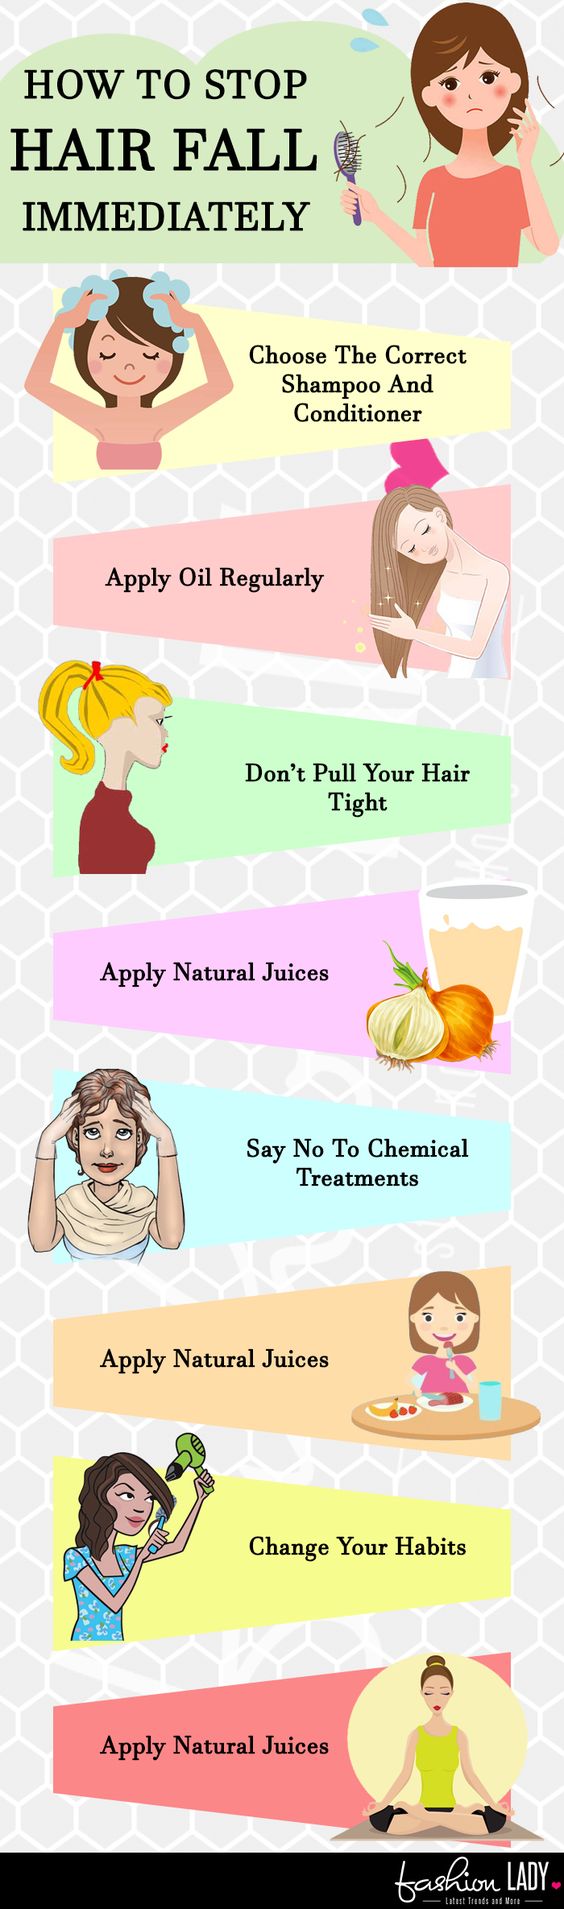 Home Remedies for Hair Loss | Top 10 Home Remedies